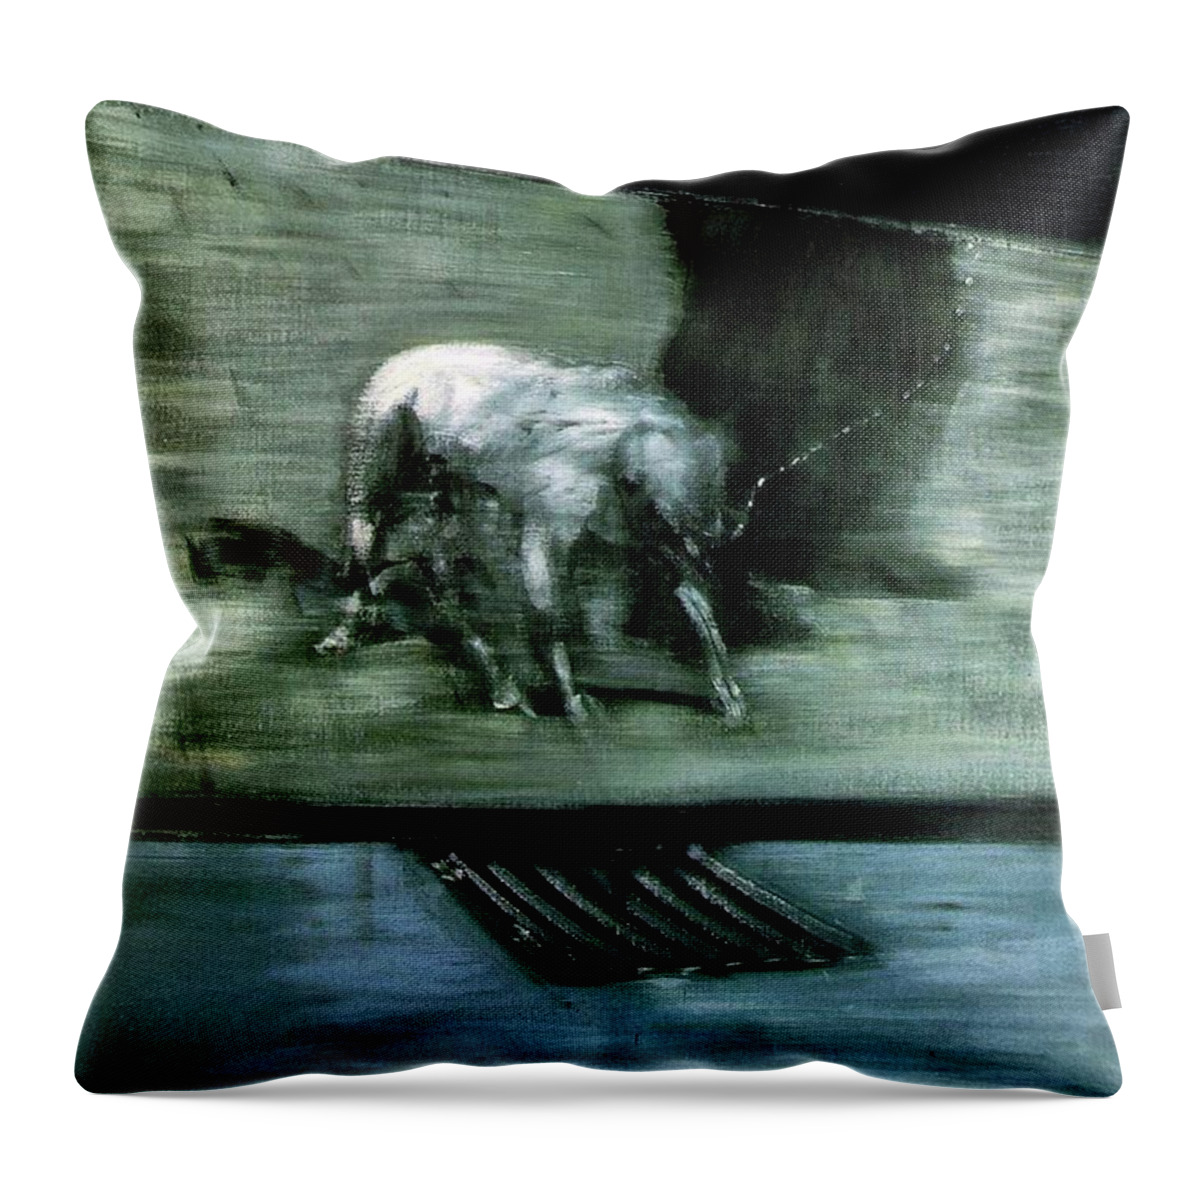 Man With Dog Throw Pillow featuring the painting Man with Dog by Francis Bacon